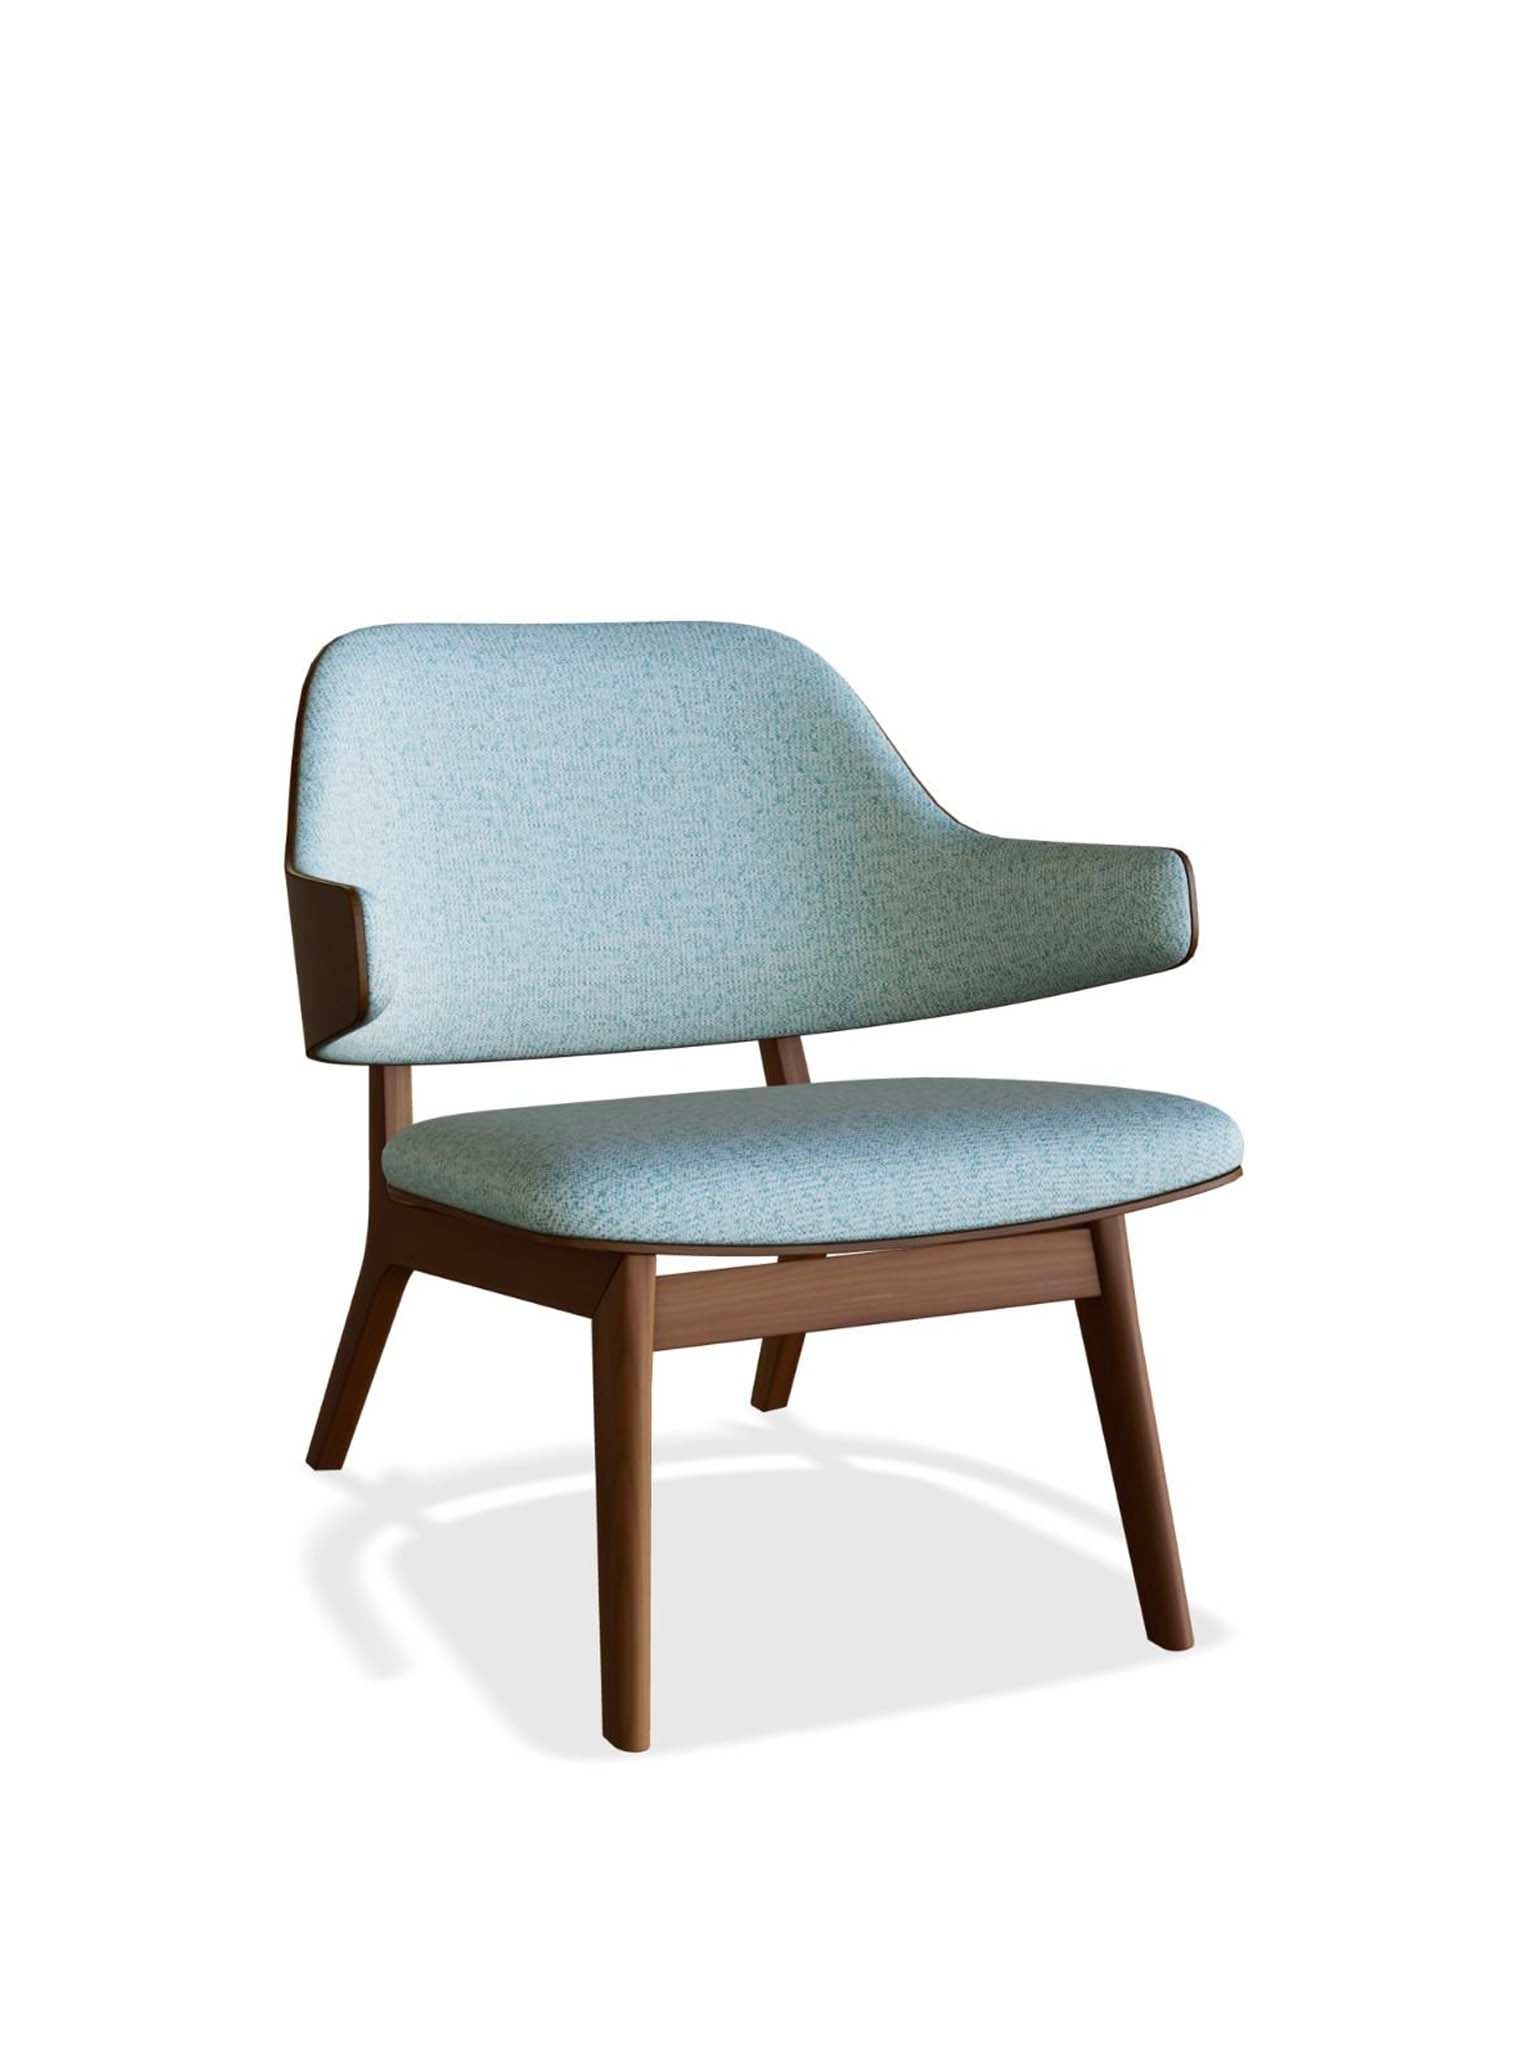 A Handcrafted Mid-Century Modern Chair